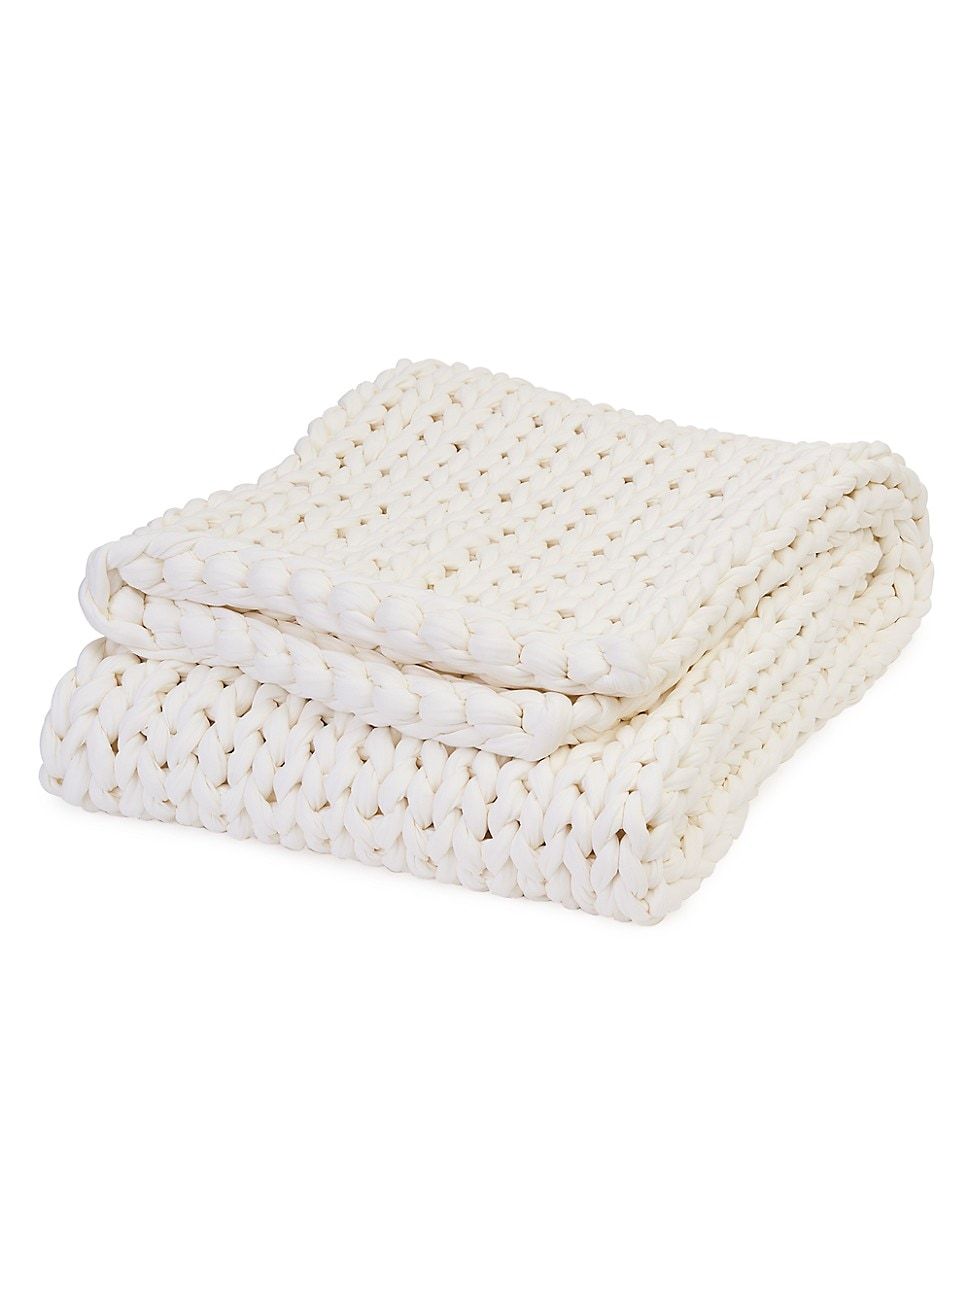 Cotton Napper Weighted Knit Blanket - Cloud | Saks Fifth Avenue